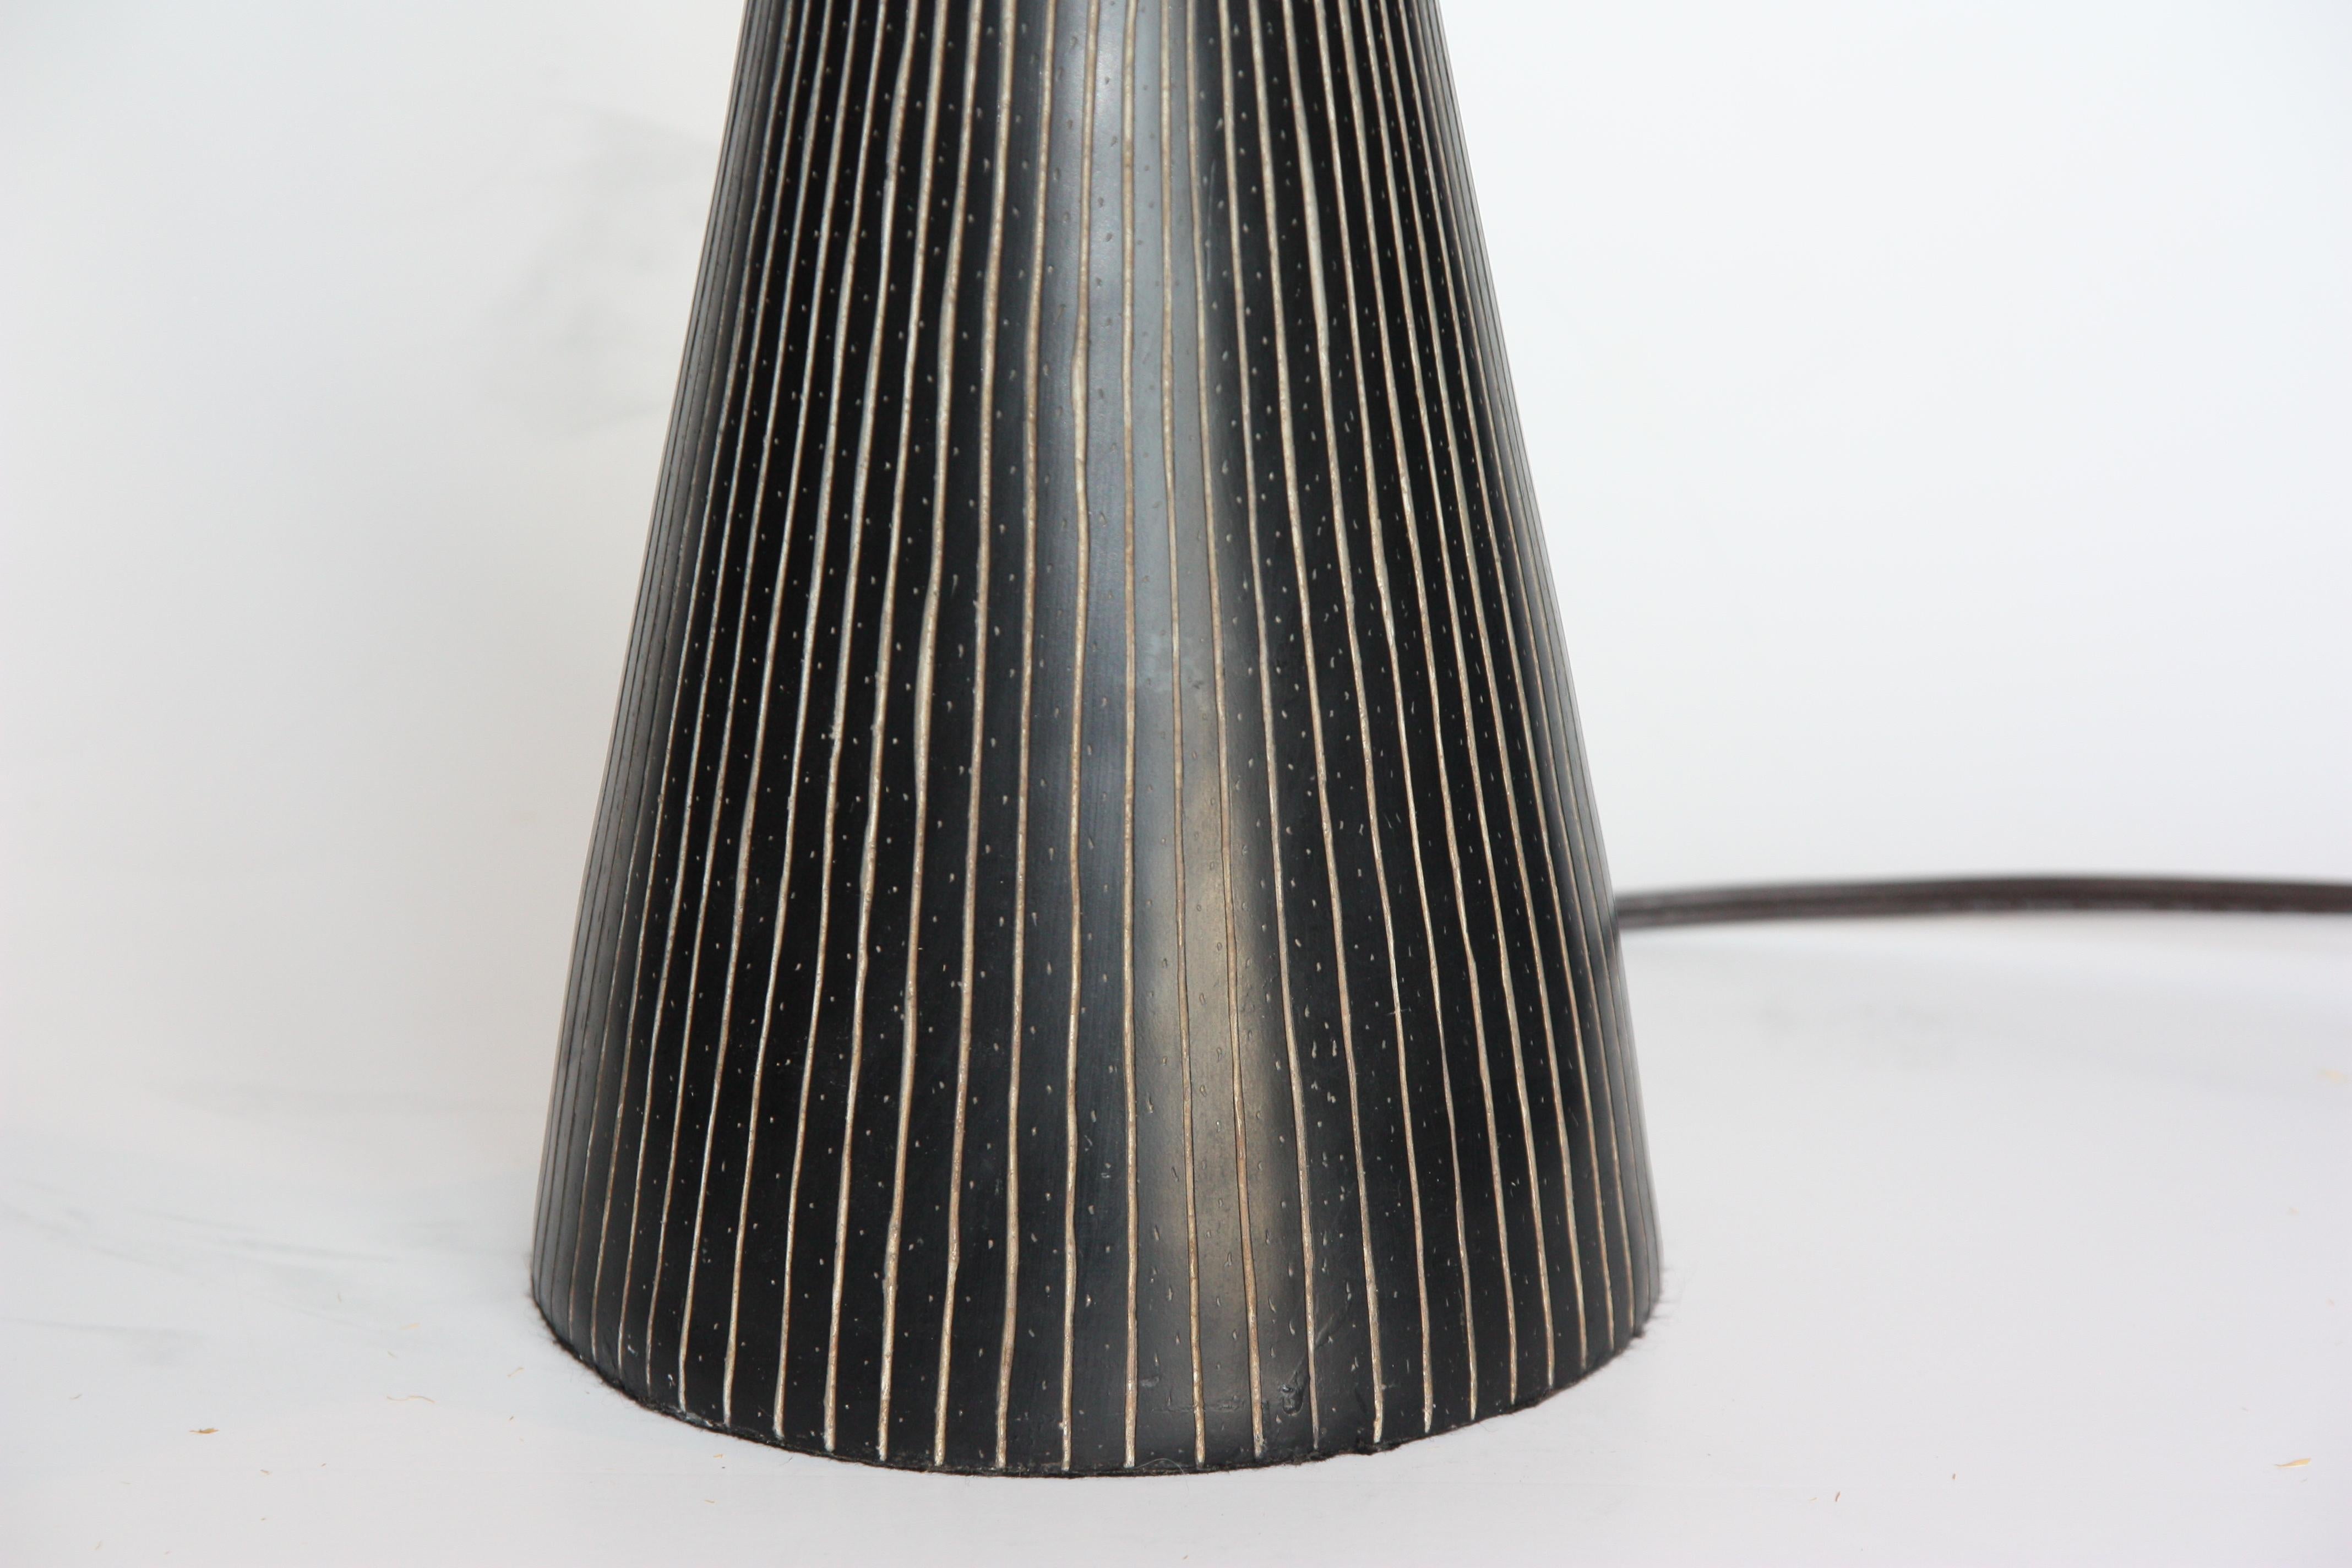 Carved black wood lamp with vertical lines and original finial. Original grasscloth shade included.